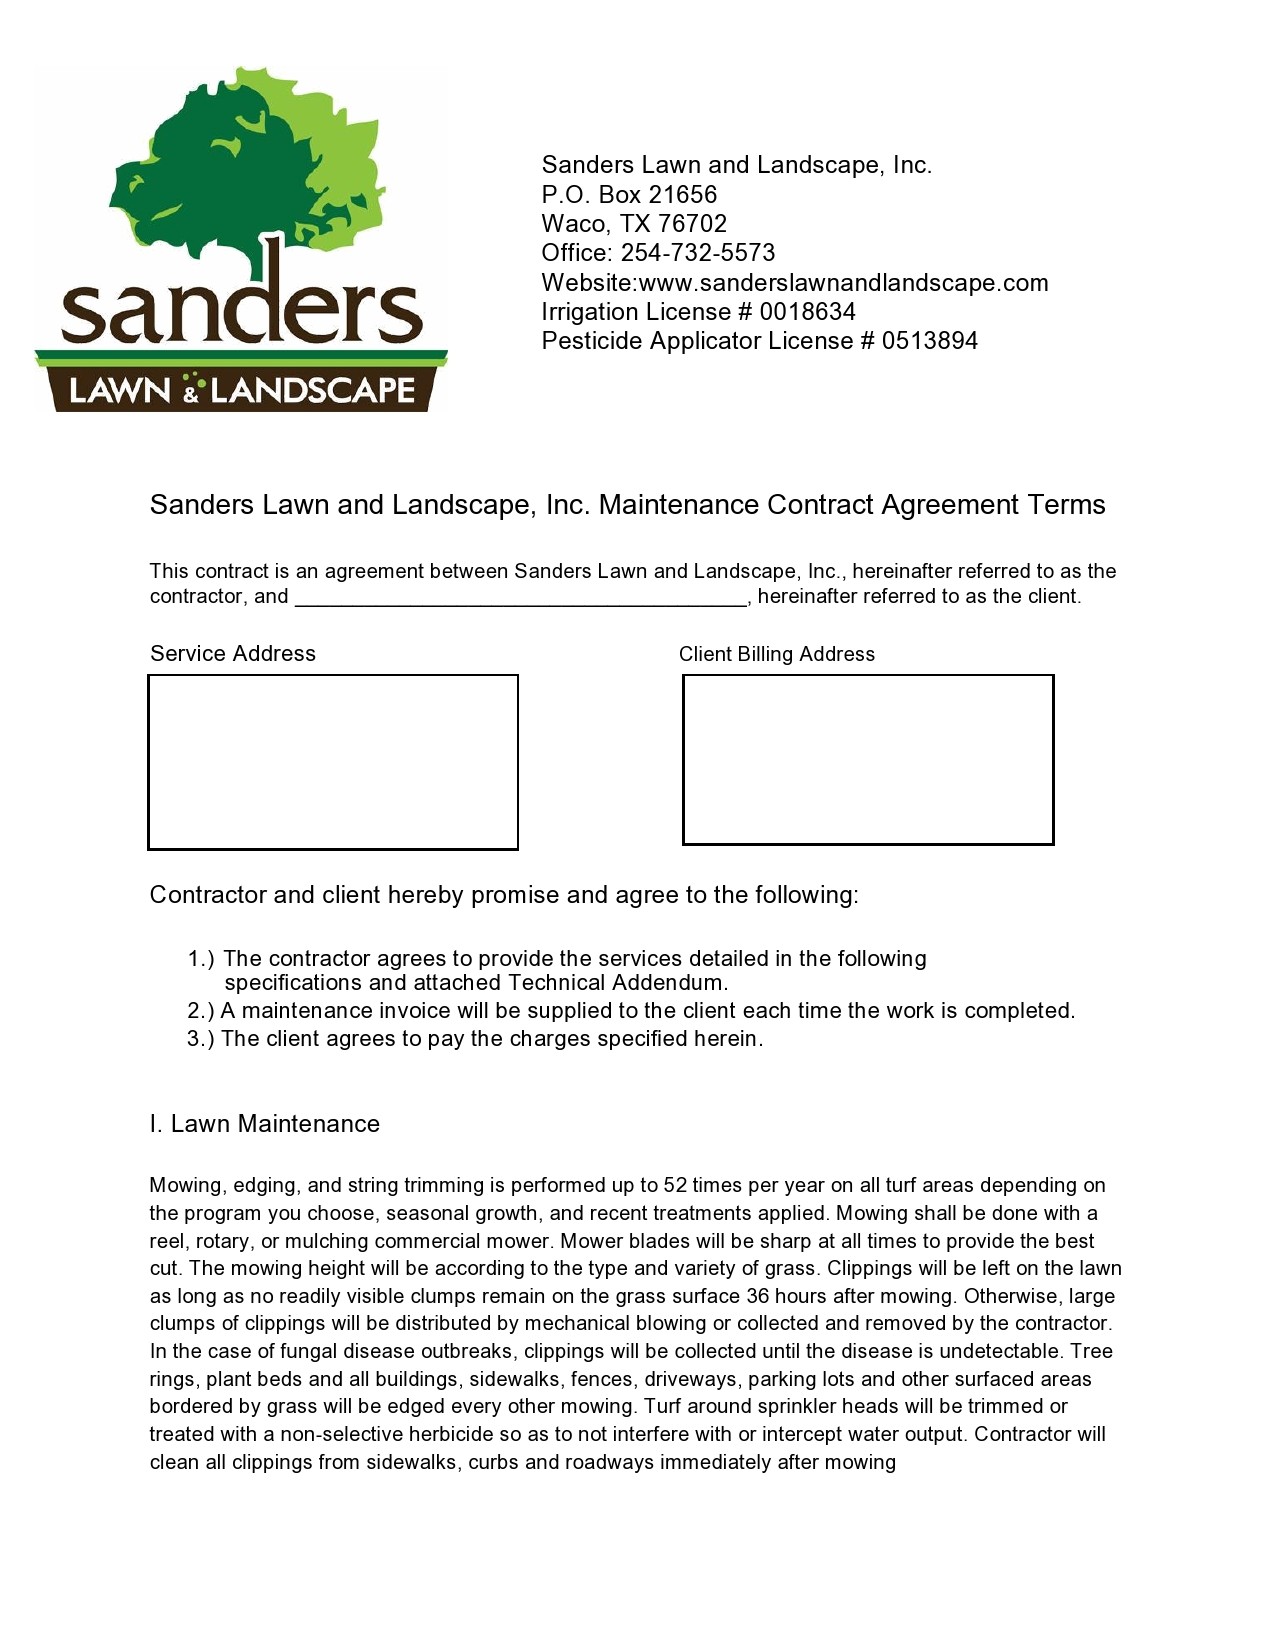 Free lawn care contract template 03